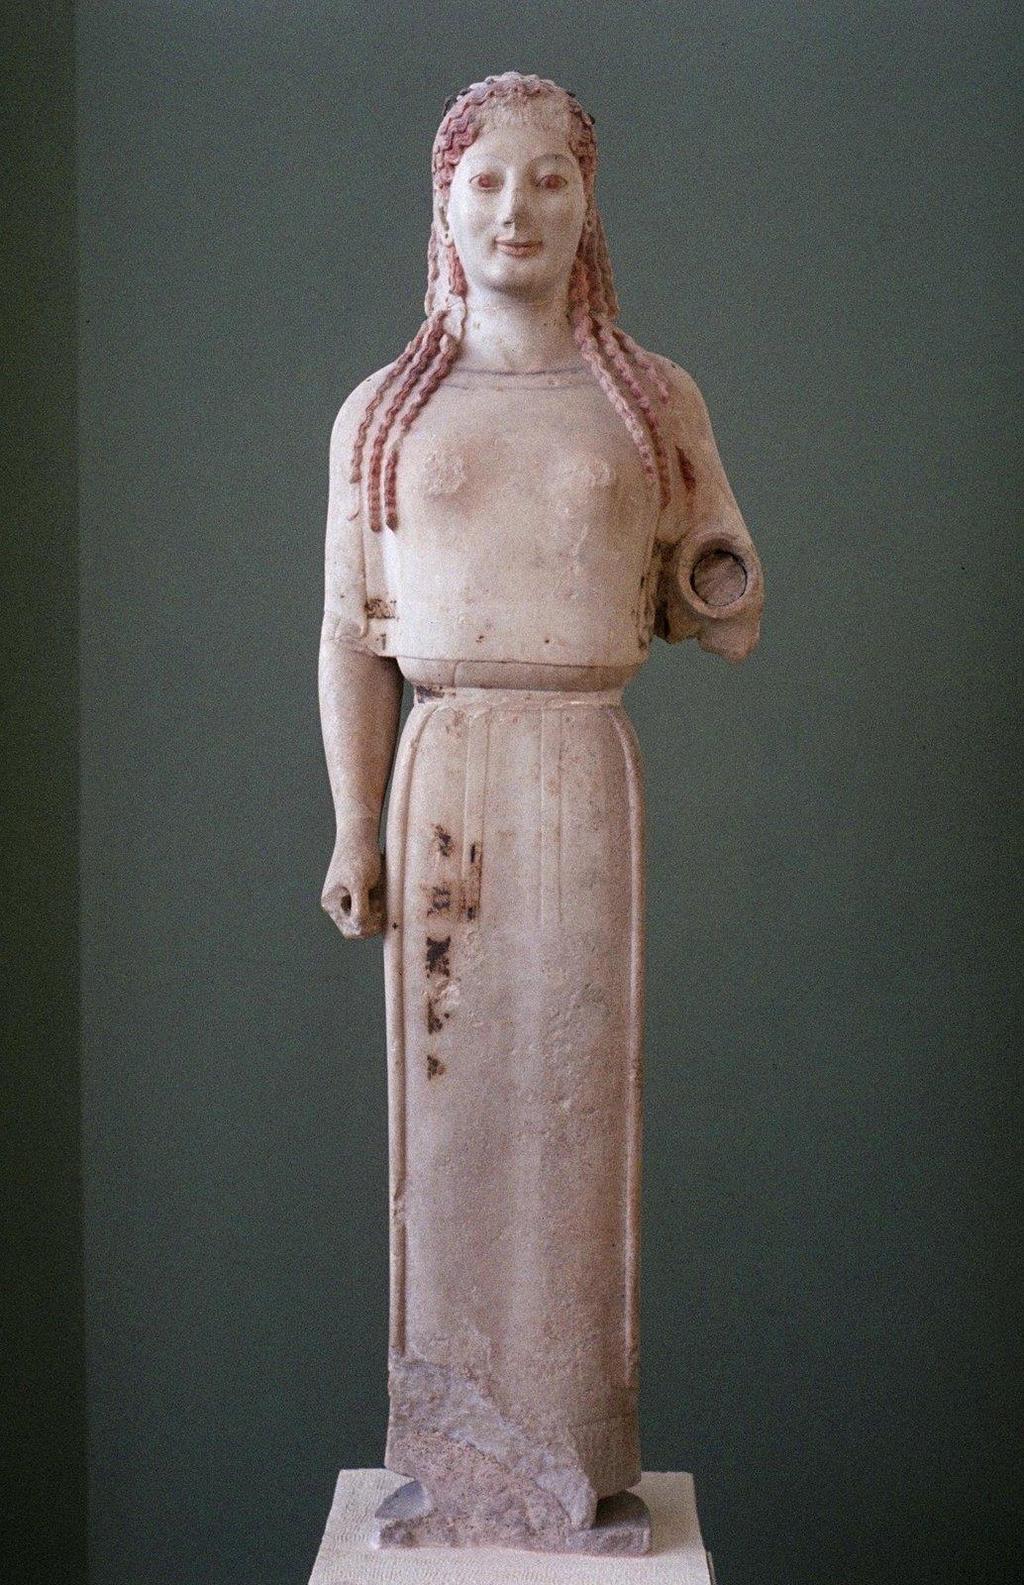 28. Peplos Kore from the Acropolis Archaic Greek c. 530 B.C.E. Marble, painted details Broken hand probably means she was fitted with an attribute. Goddess?